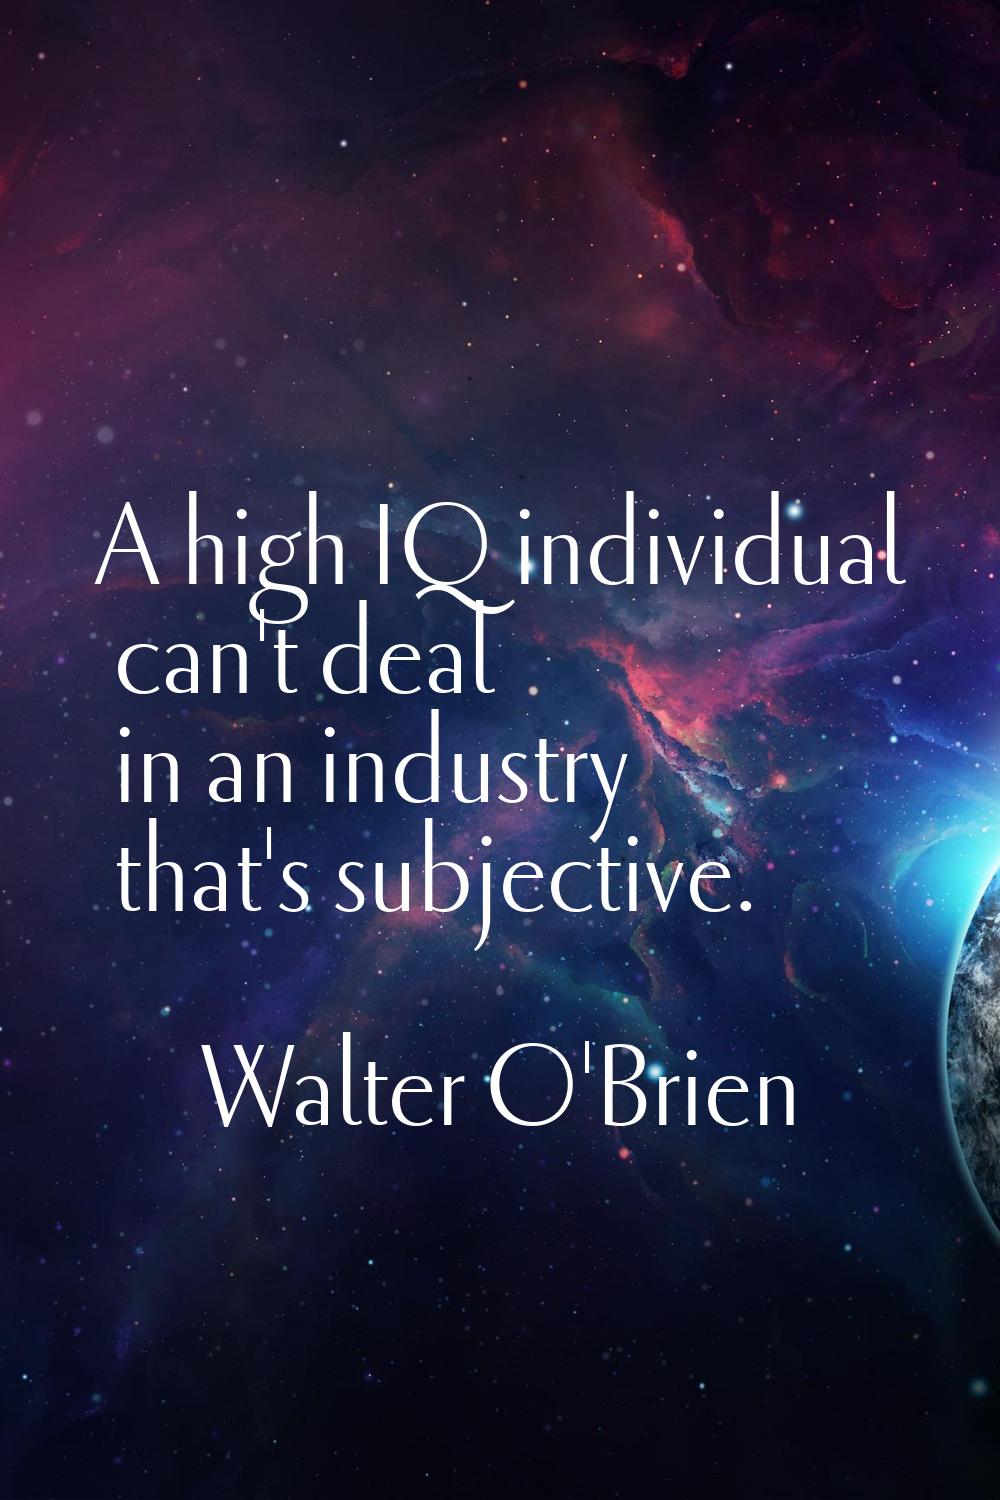 A high IQ individual can't deal in an industry that's subjective.